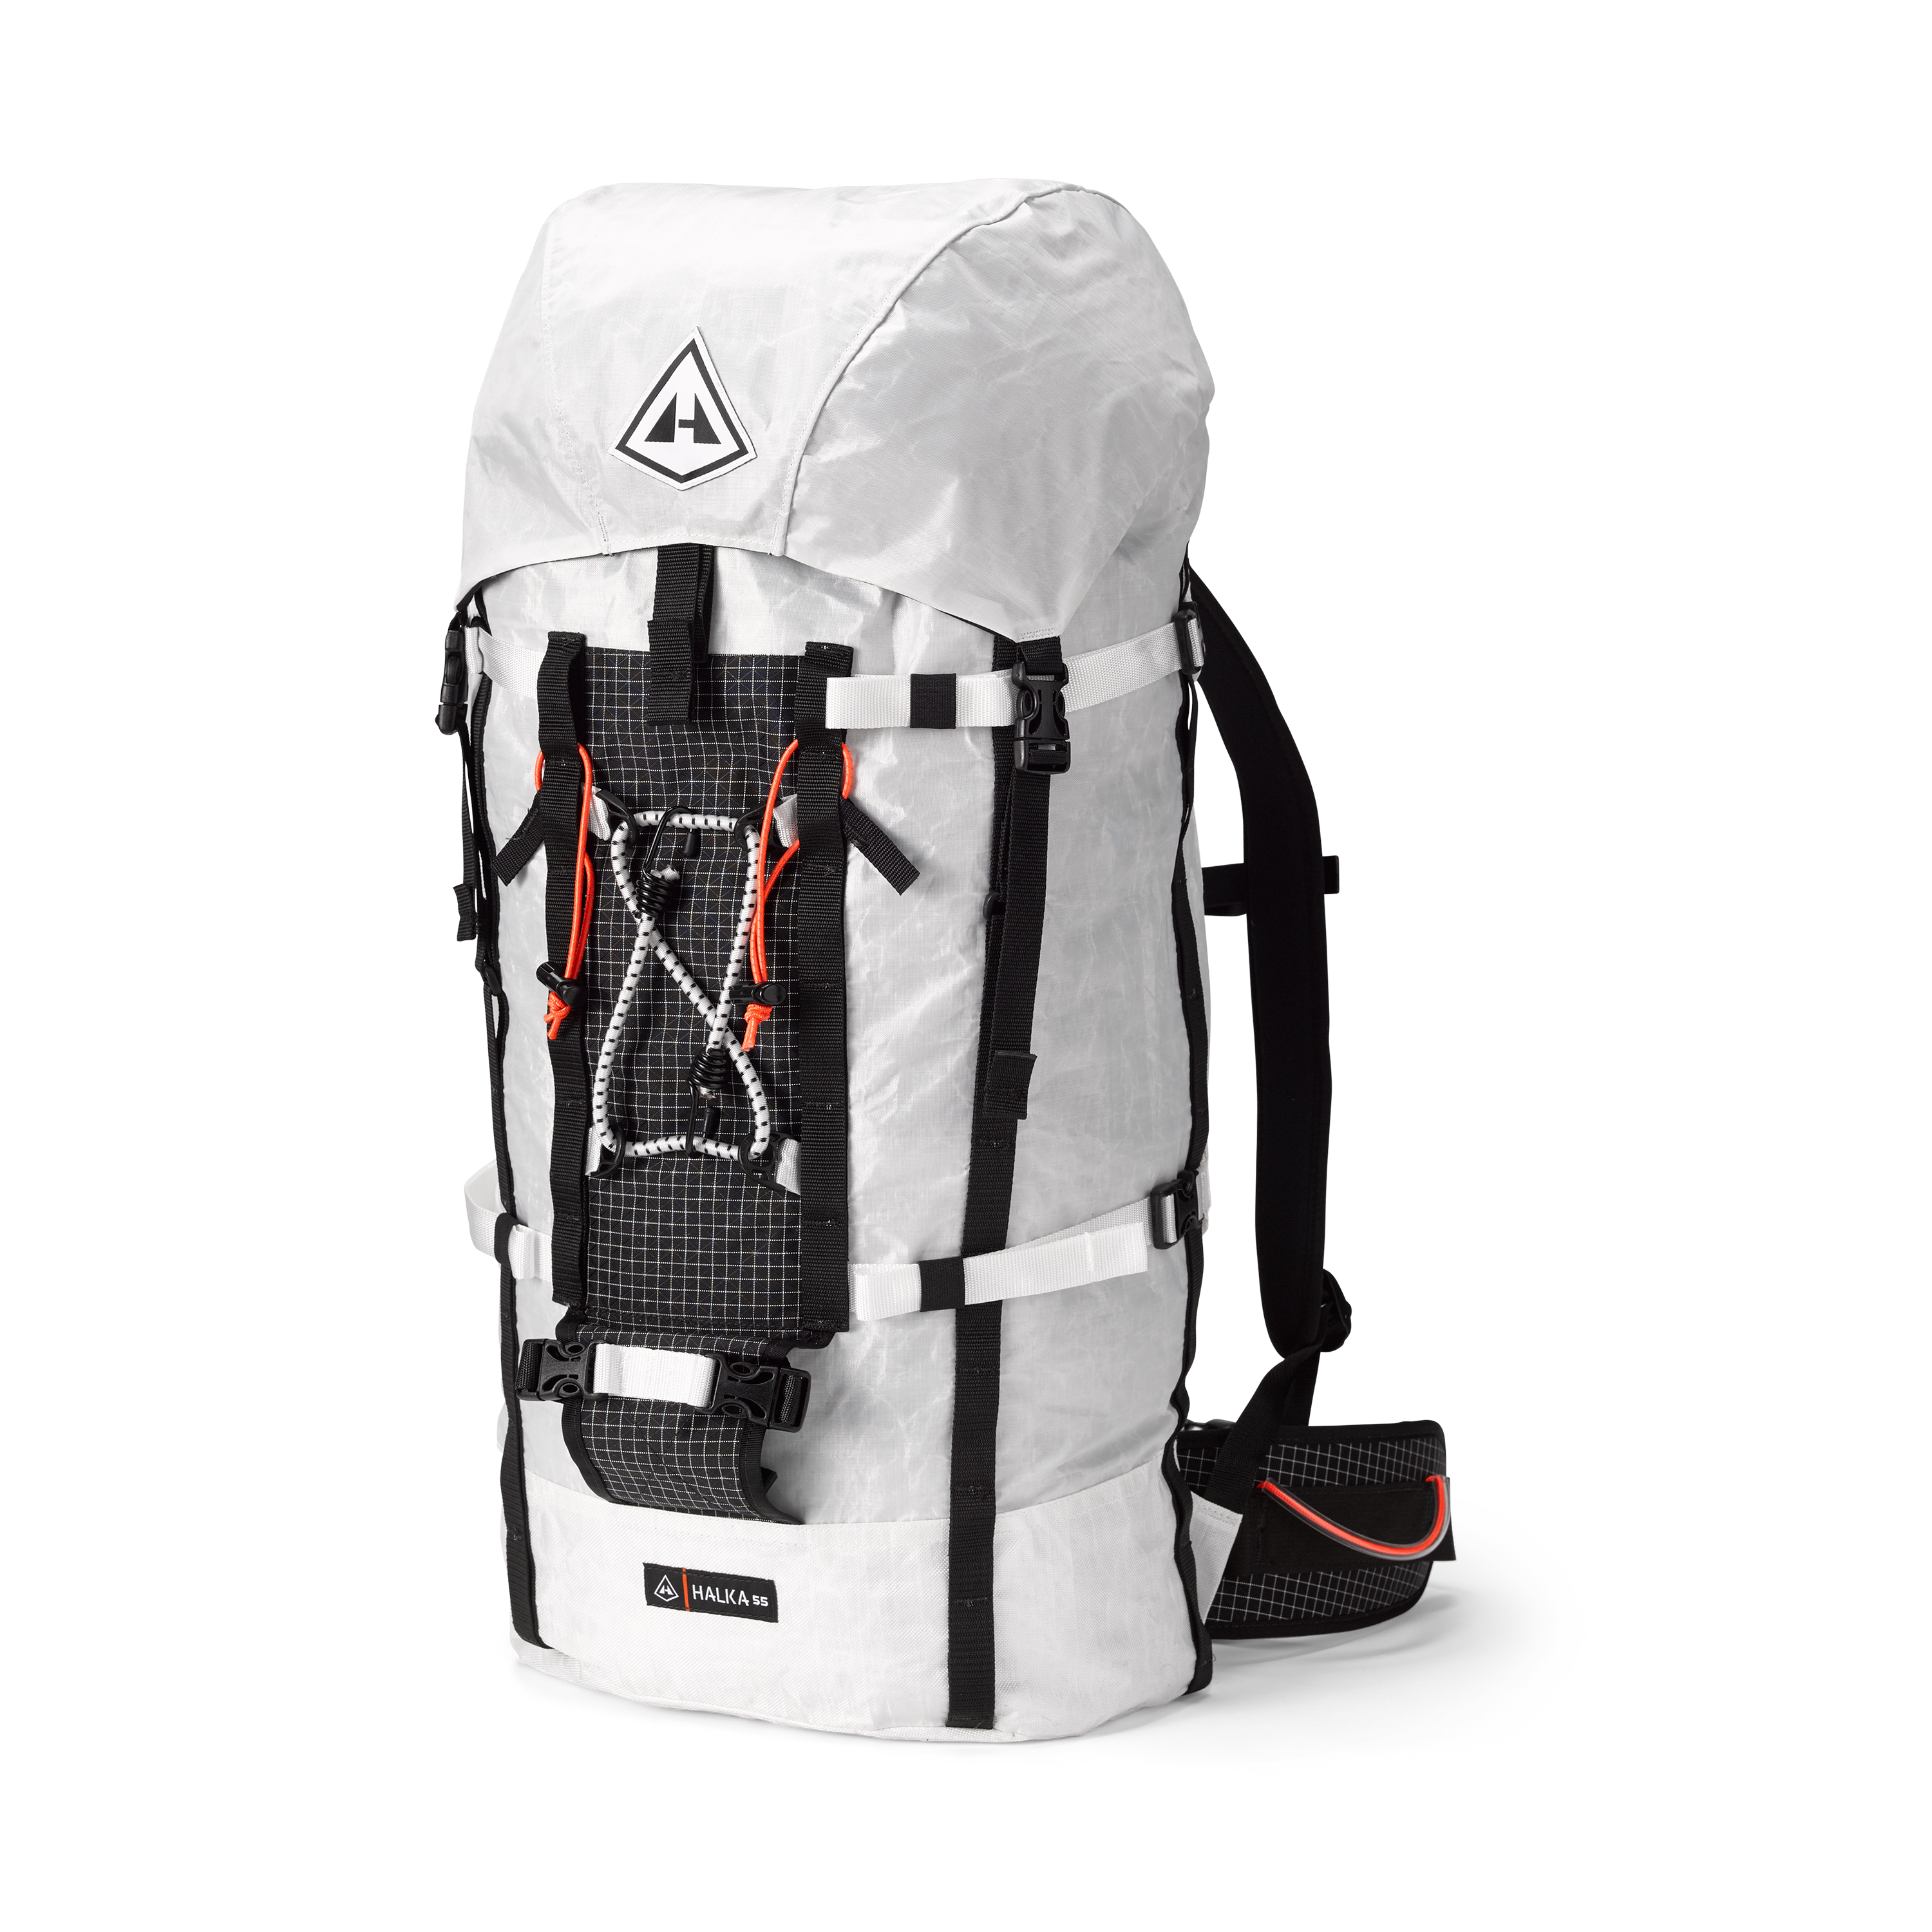 A white backpack with black straps on it.